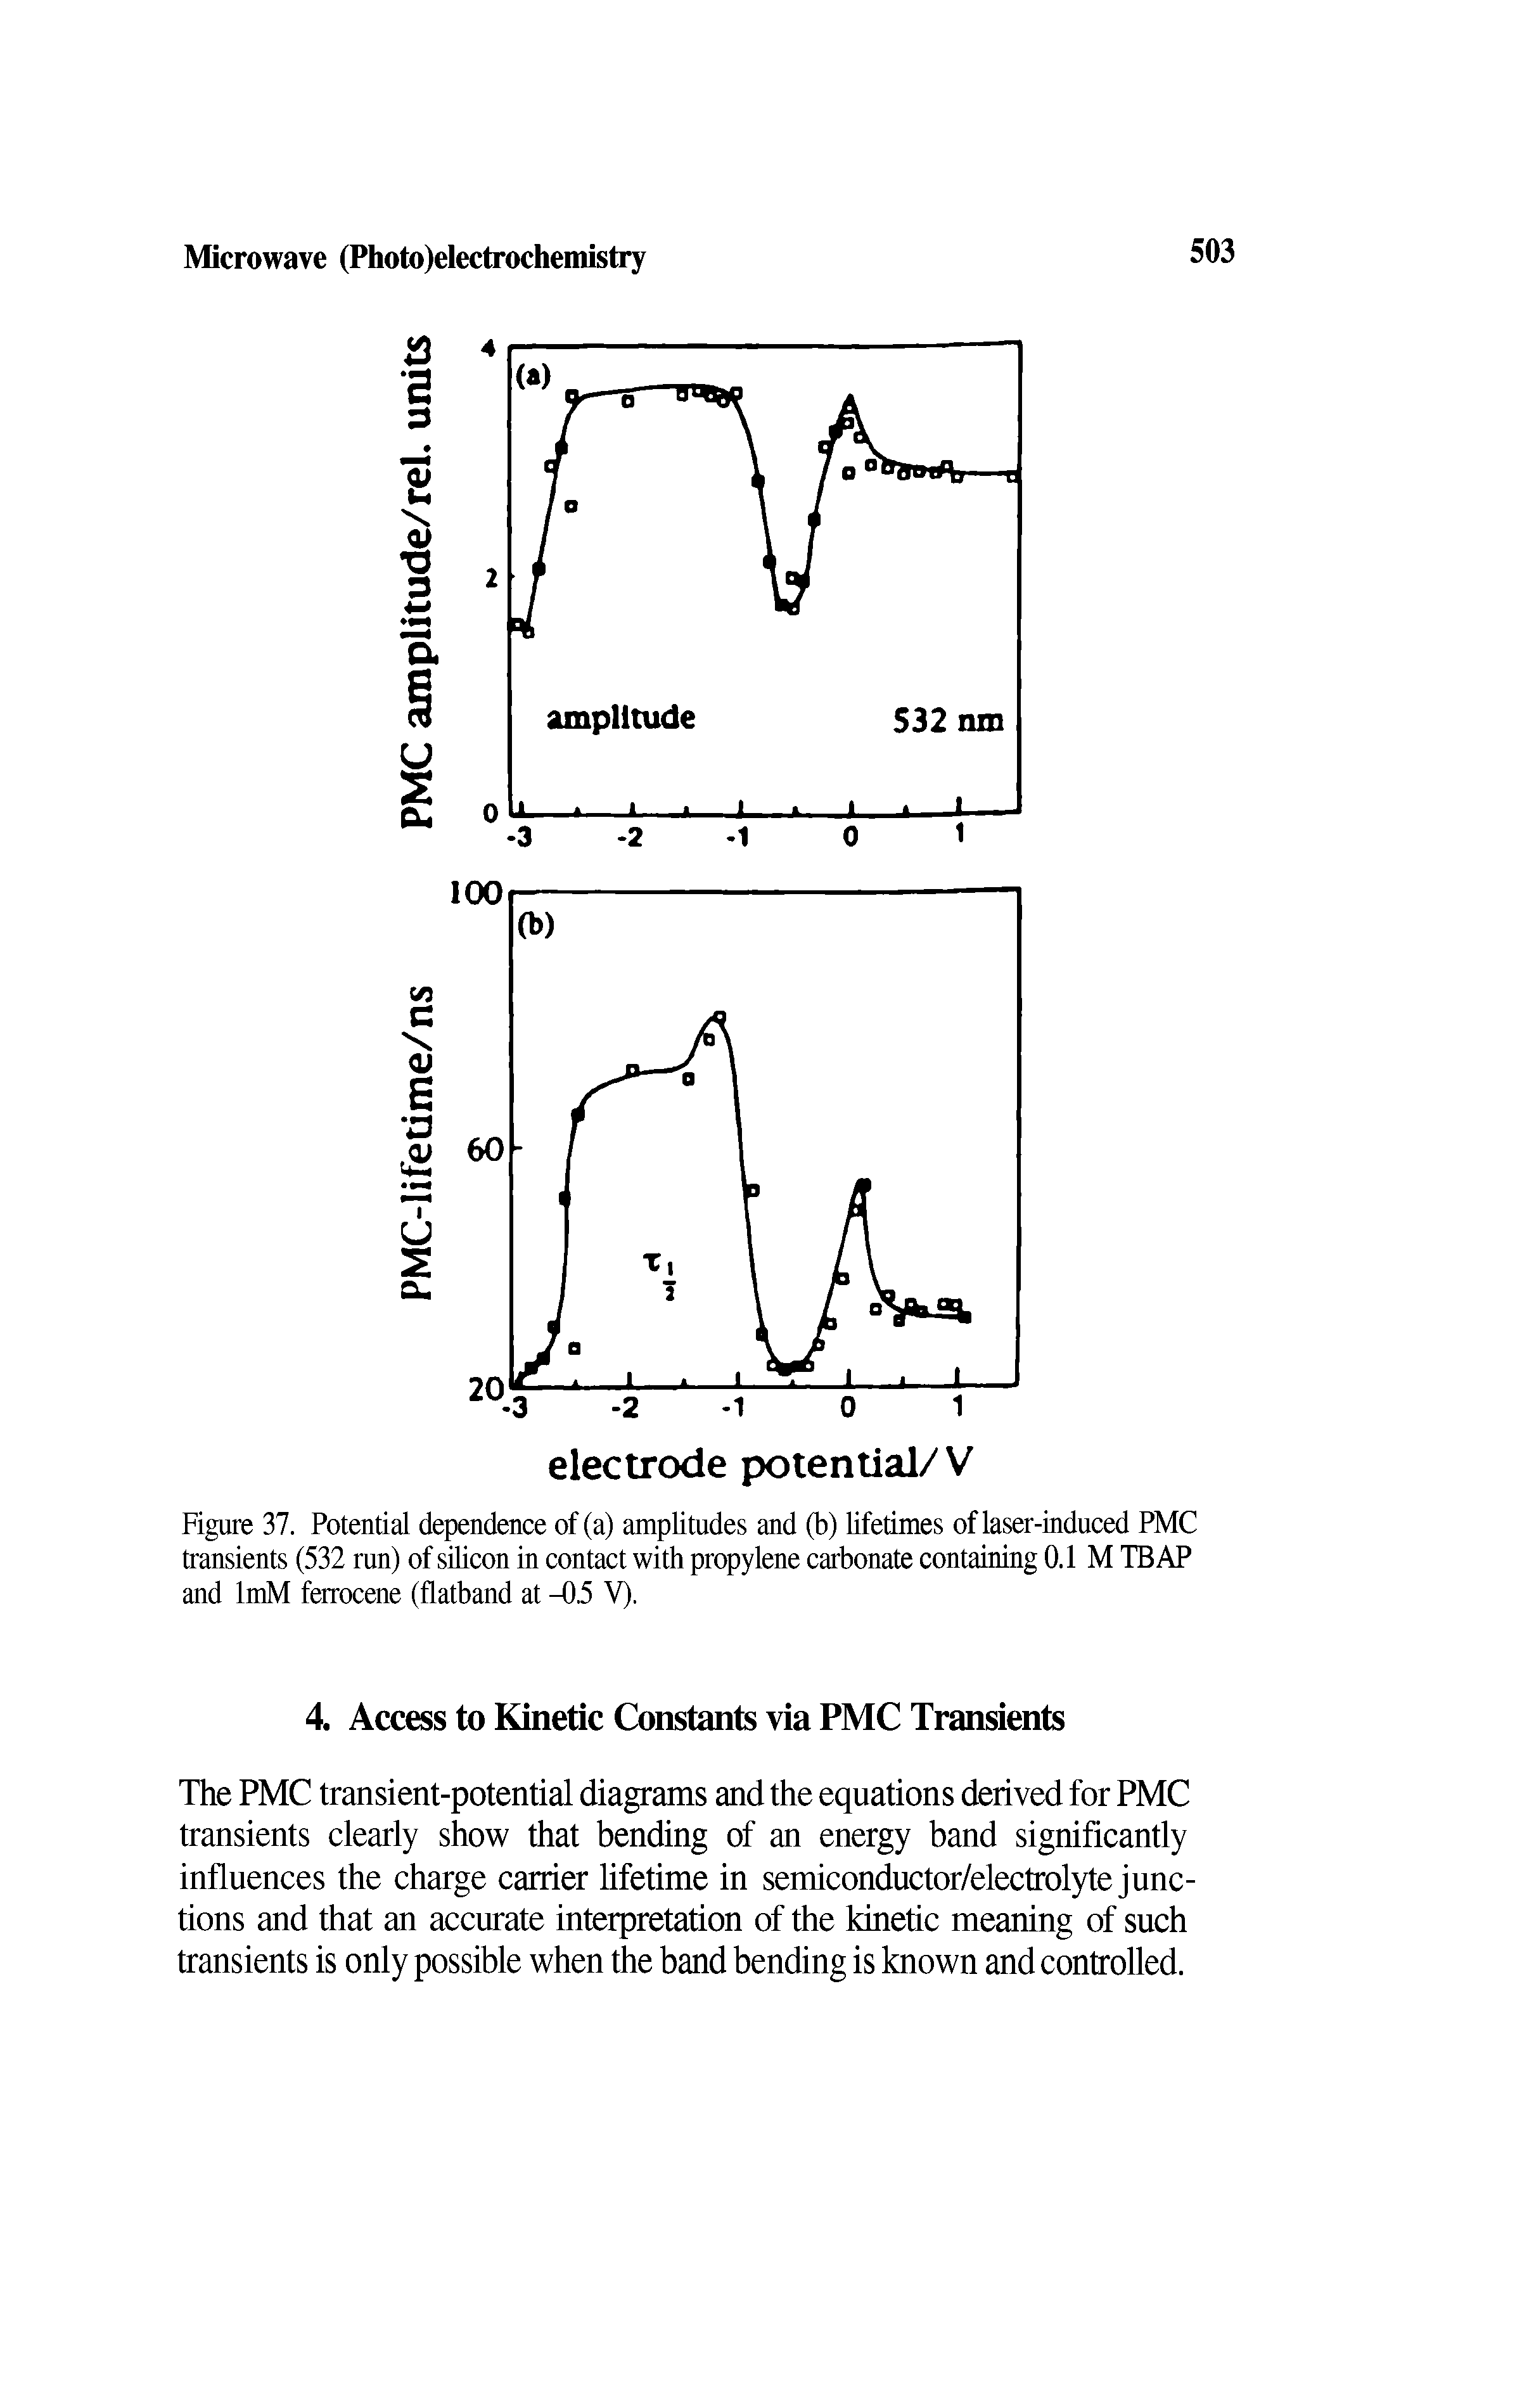 Figure 37. Potential dependence of (a) amplitudes and (b) lifetimes of laser-induced PMC transients (532 run) of silicon in contact with propylene carbonate containing 0.1 M TBAP and ImM ferrocene (flatband at -0.5 V).